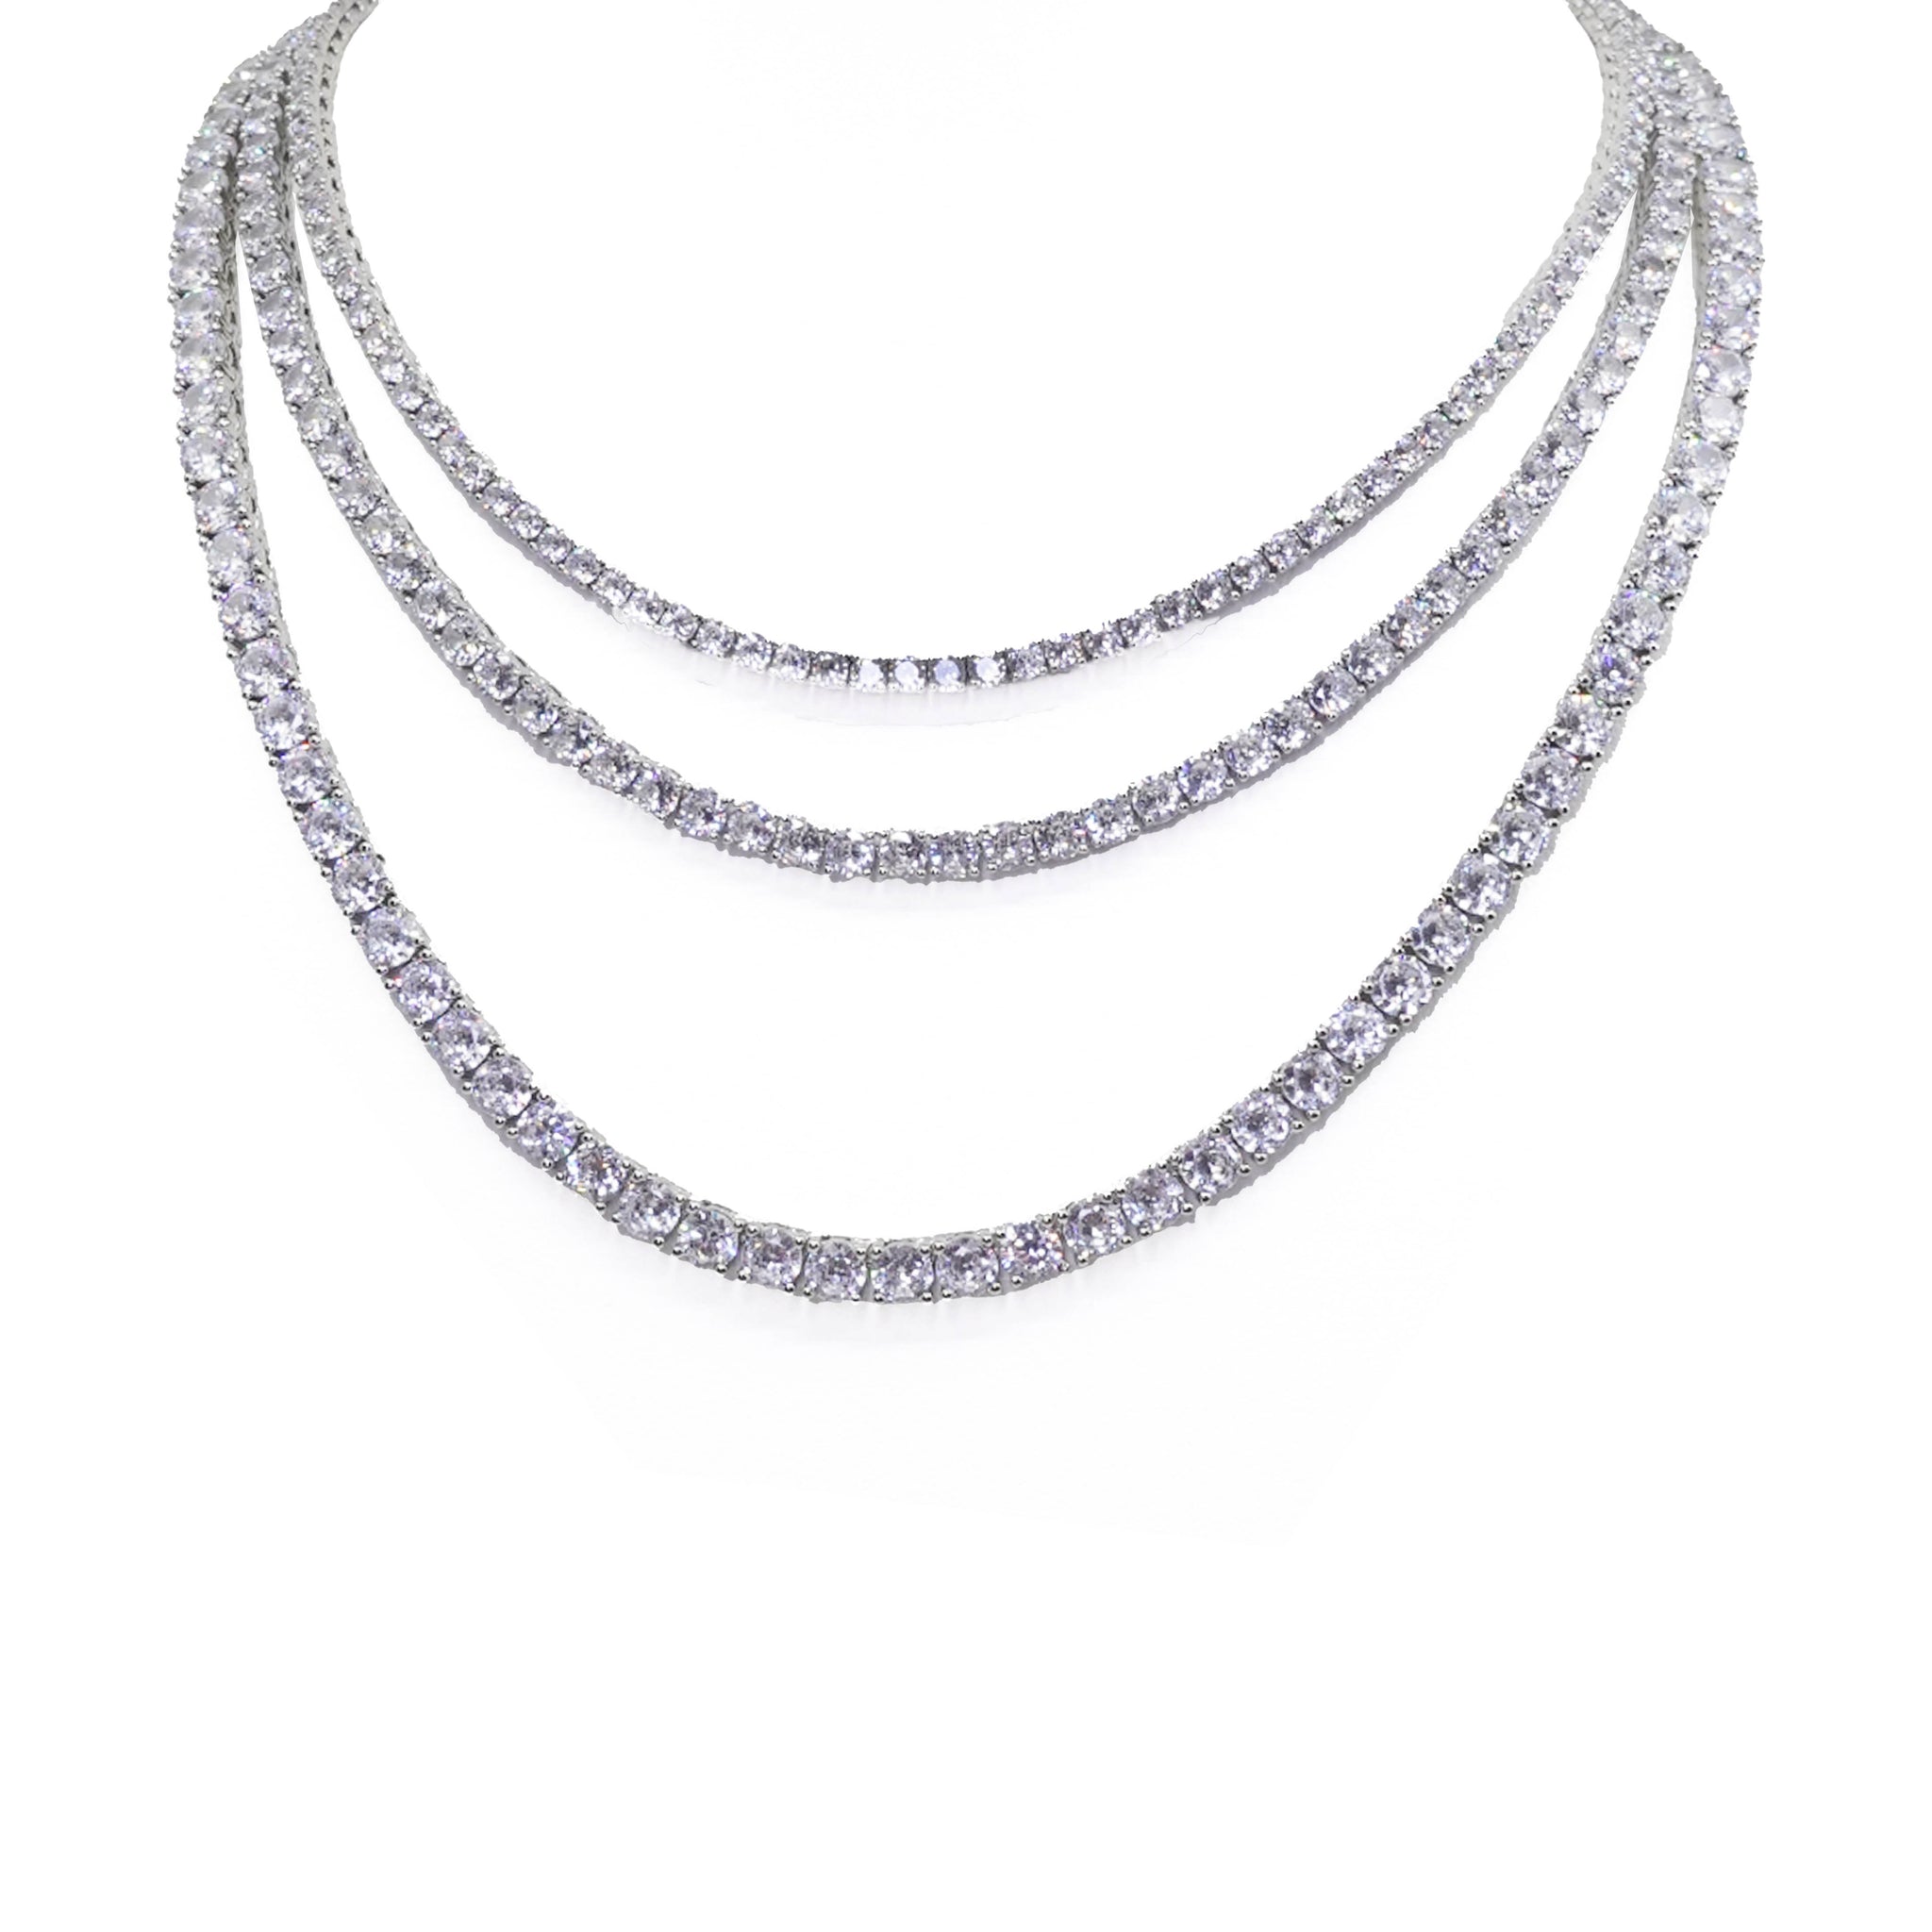 The Silver Bling Tennis Necklace